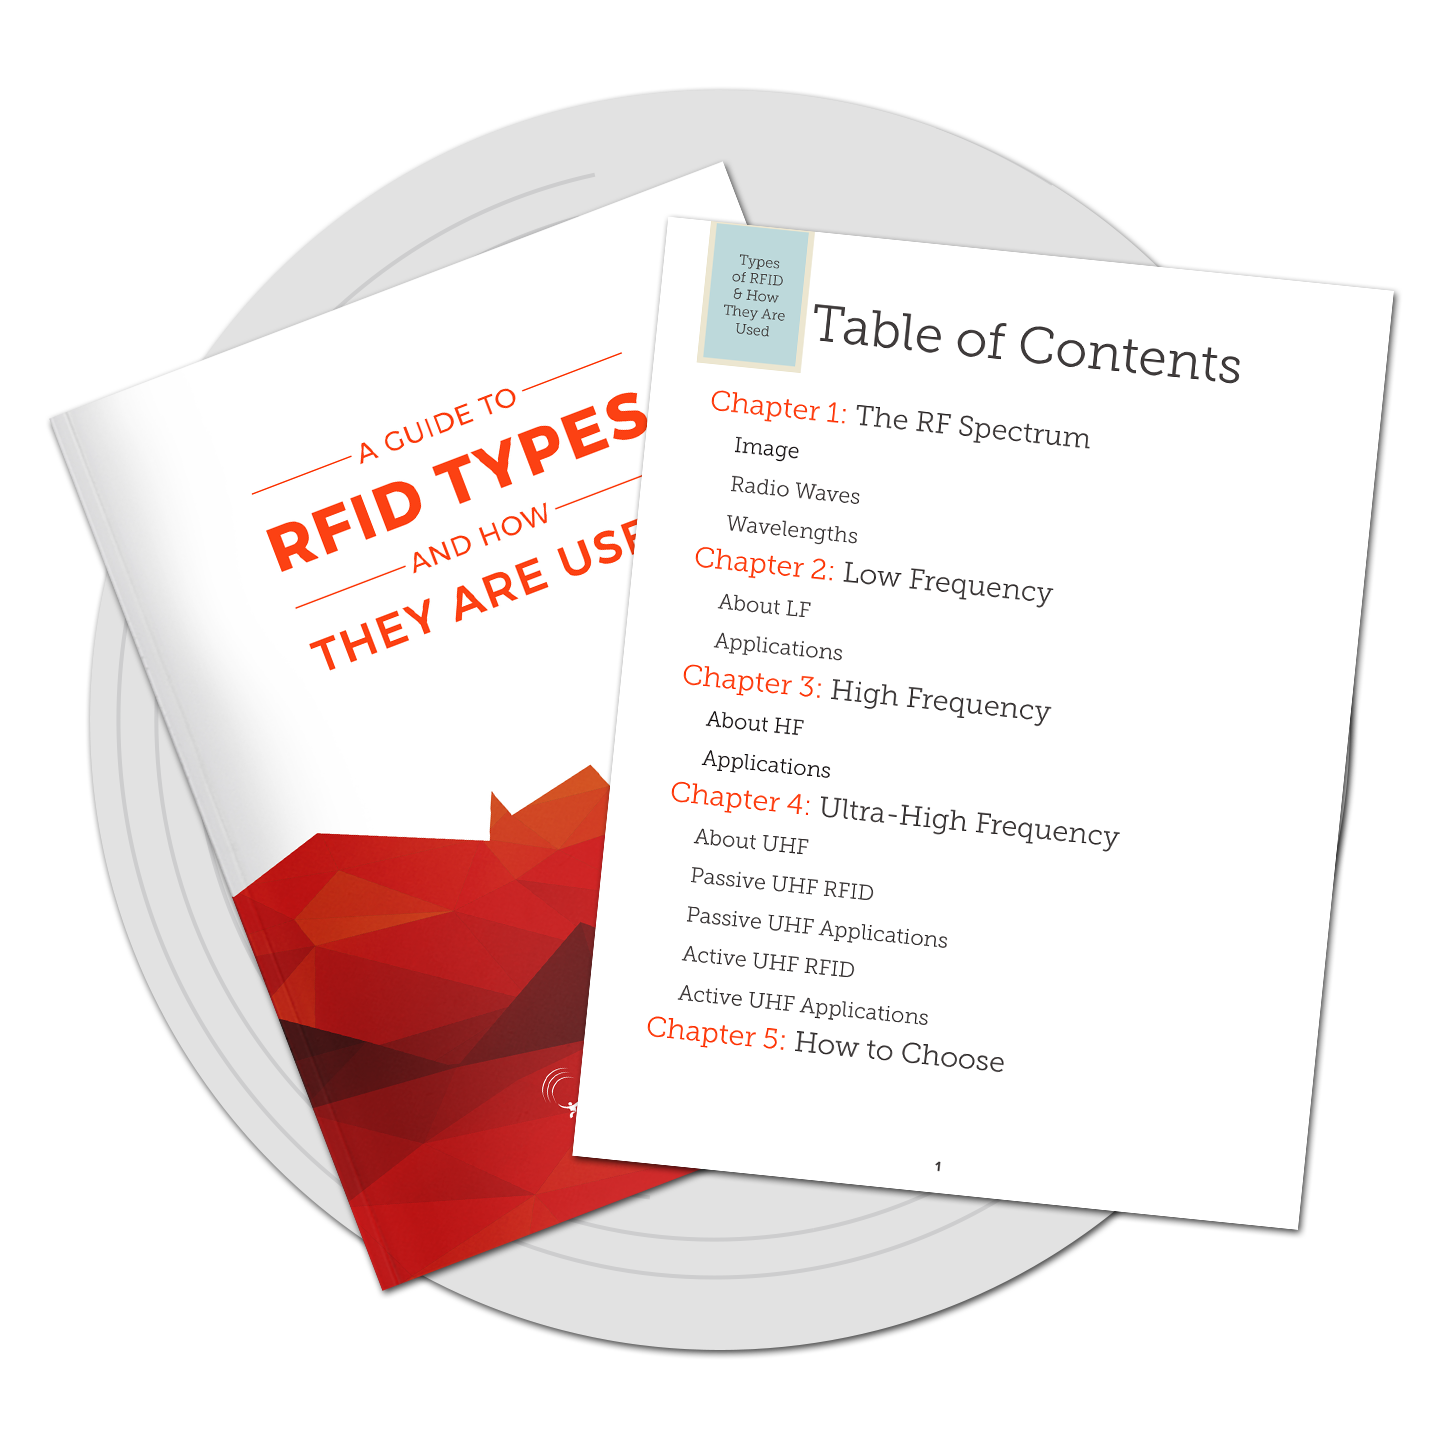 A Guide to RFID Types and How They Are Used